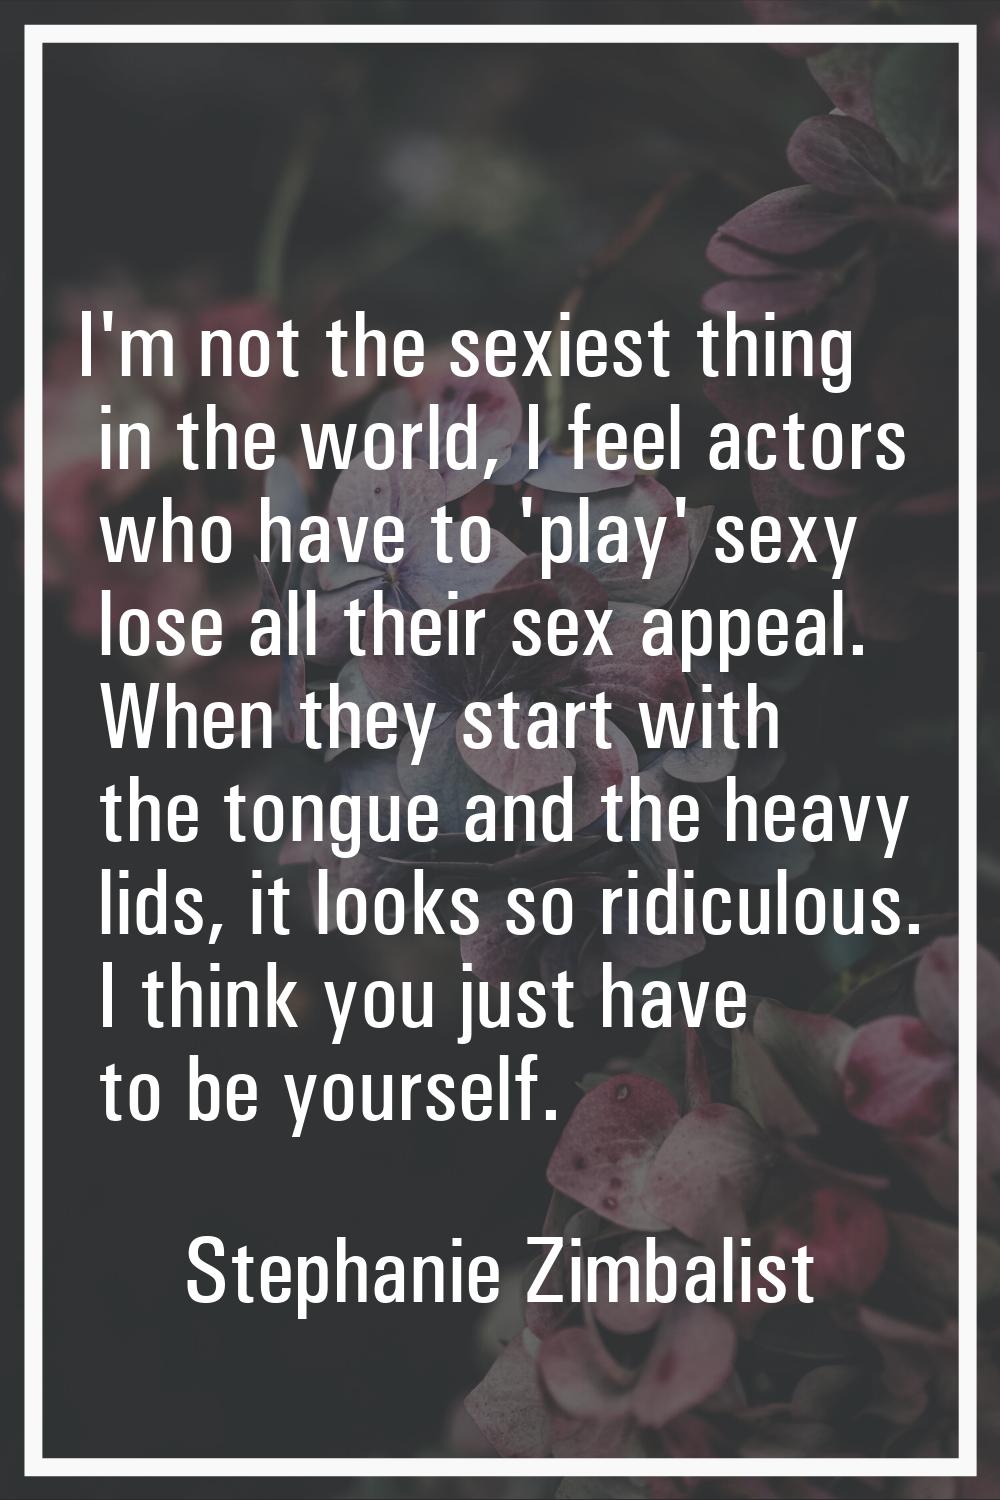 I'm not the sexiest thing in the world, I feel actors who have to 'play' sexy lose all their sex ap